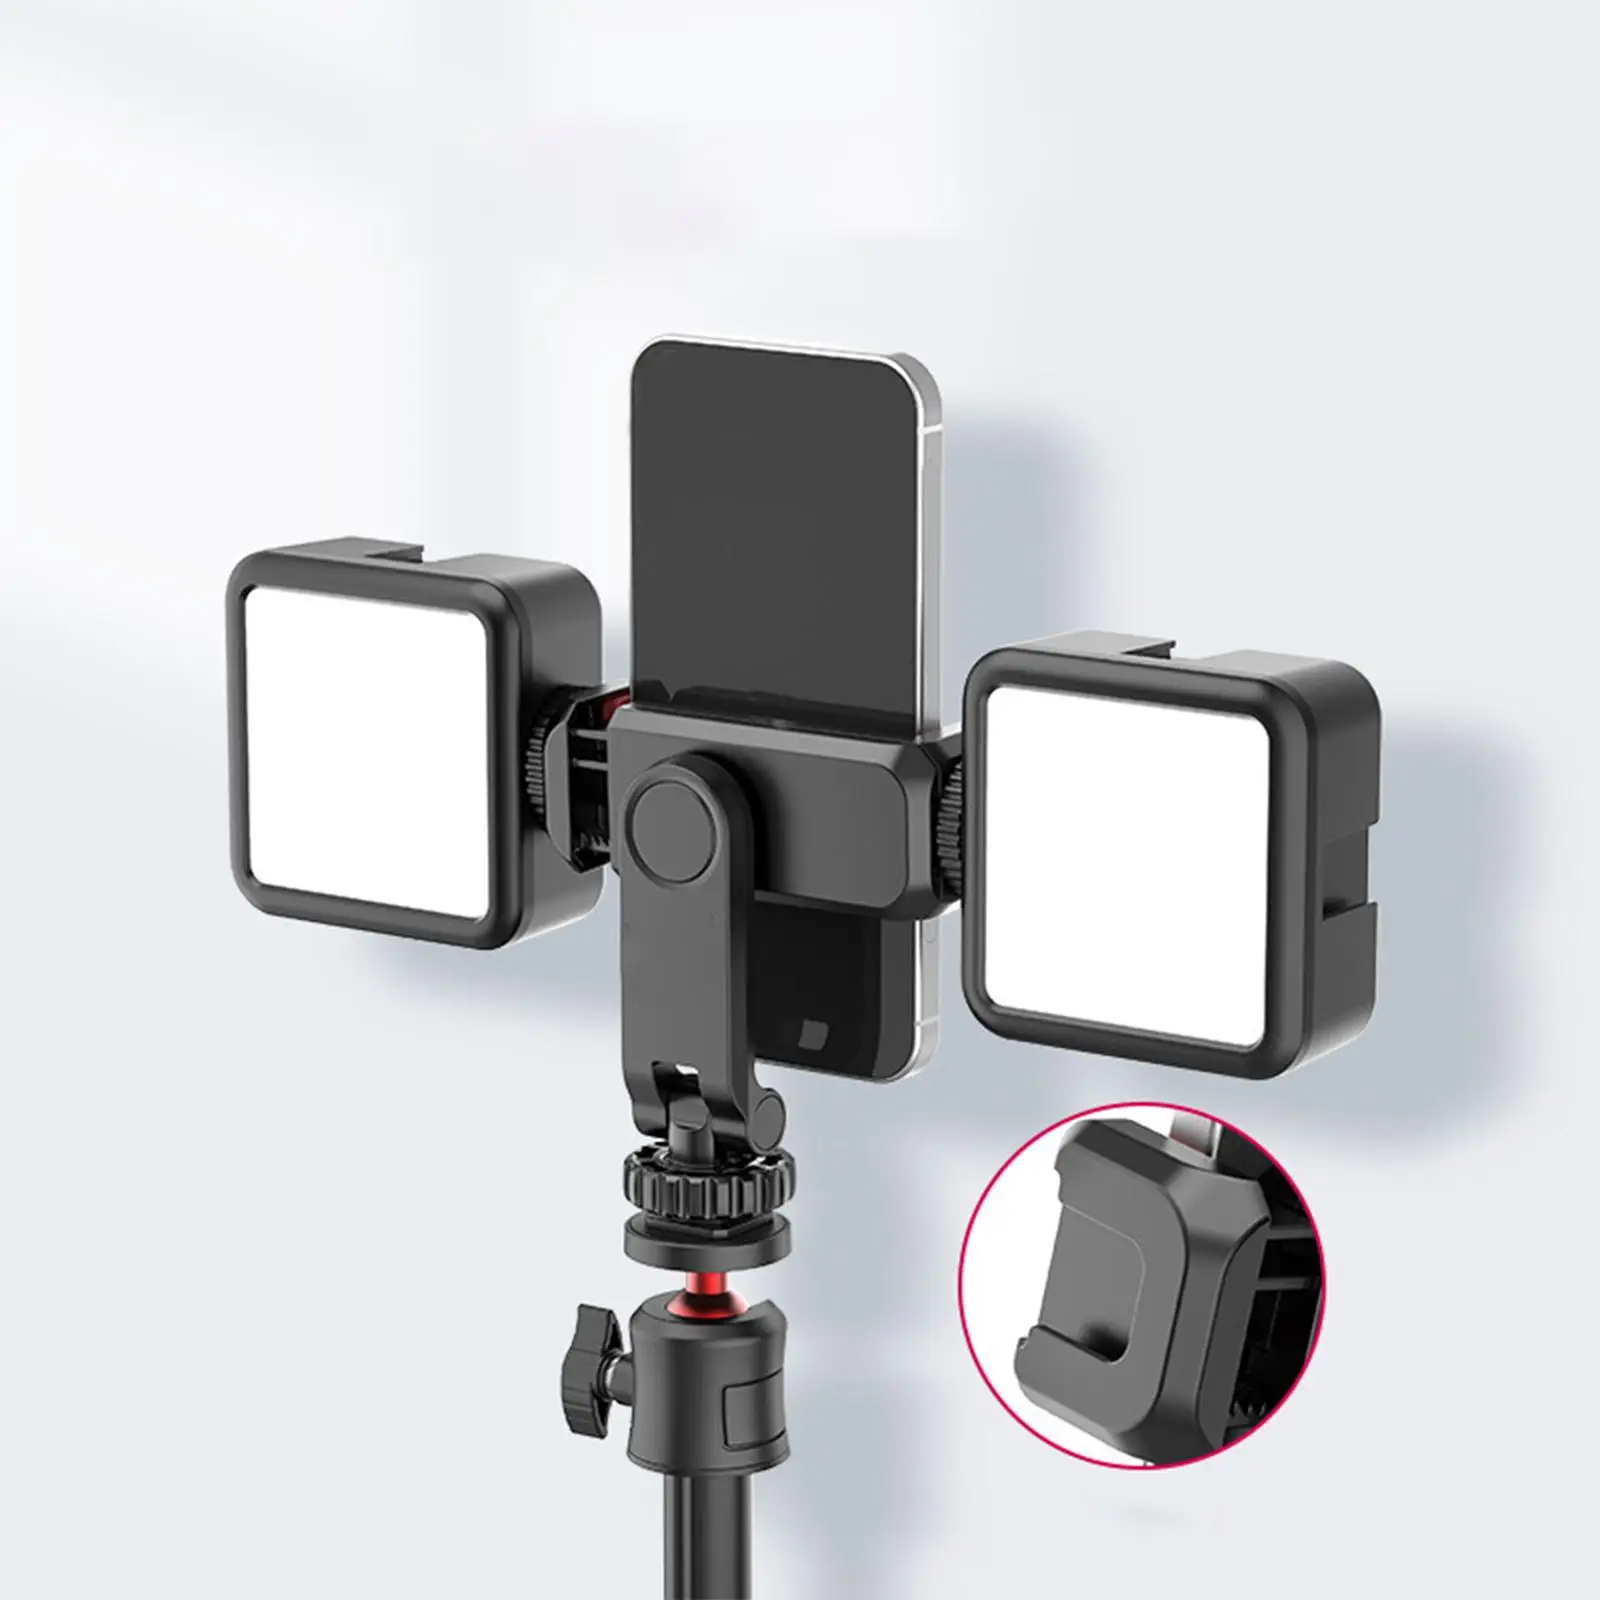 Phone Tripod Mount Adapter Clamp for Video Photo Shooting Vlog Smartphone Monopod